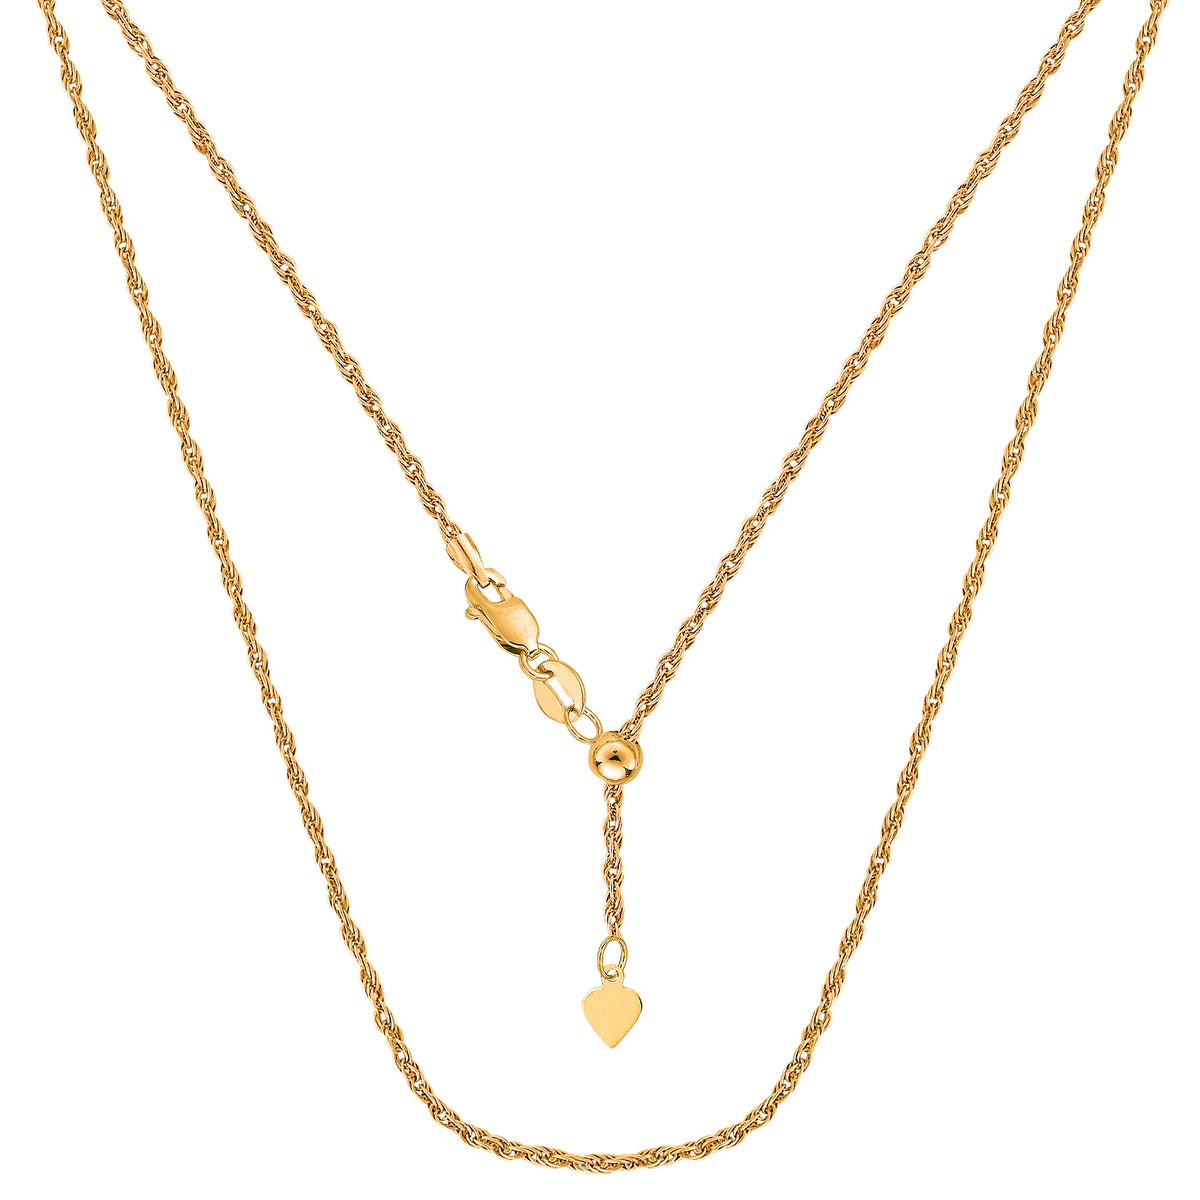 14k Yellow Gold Adjustable Rope Chain Necklace, 1.0mm, 22" fine designer jewelry for men and women